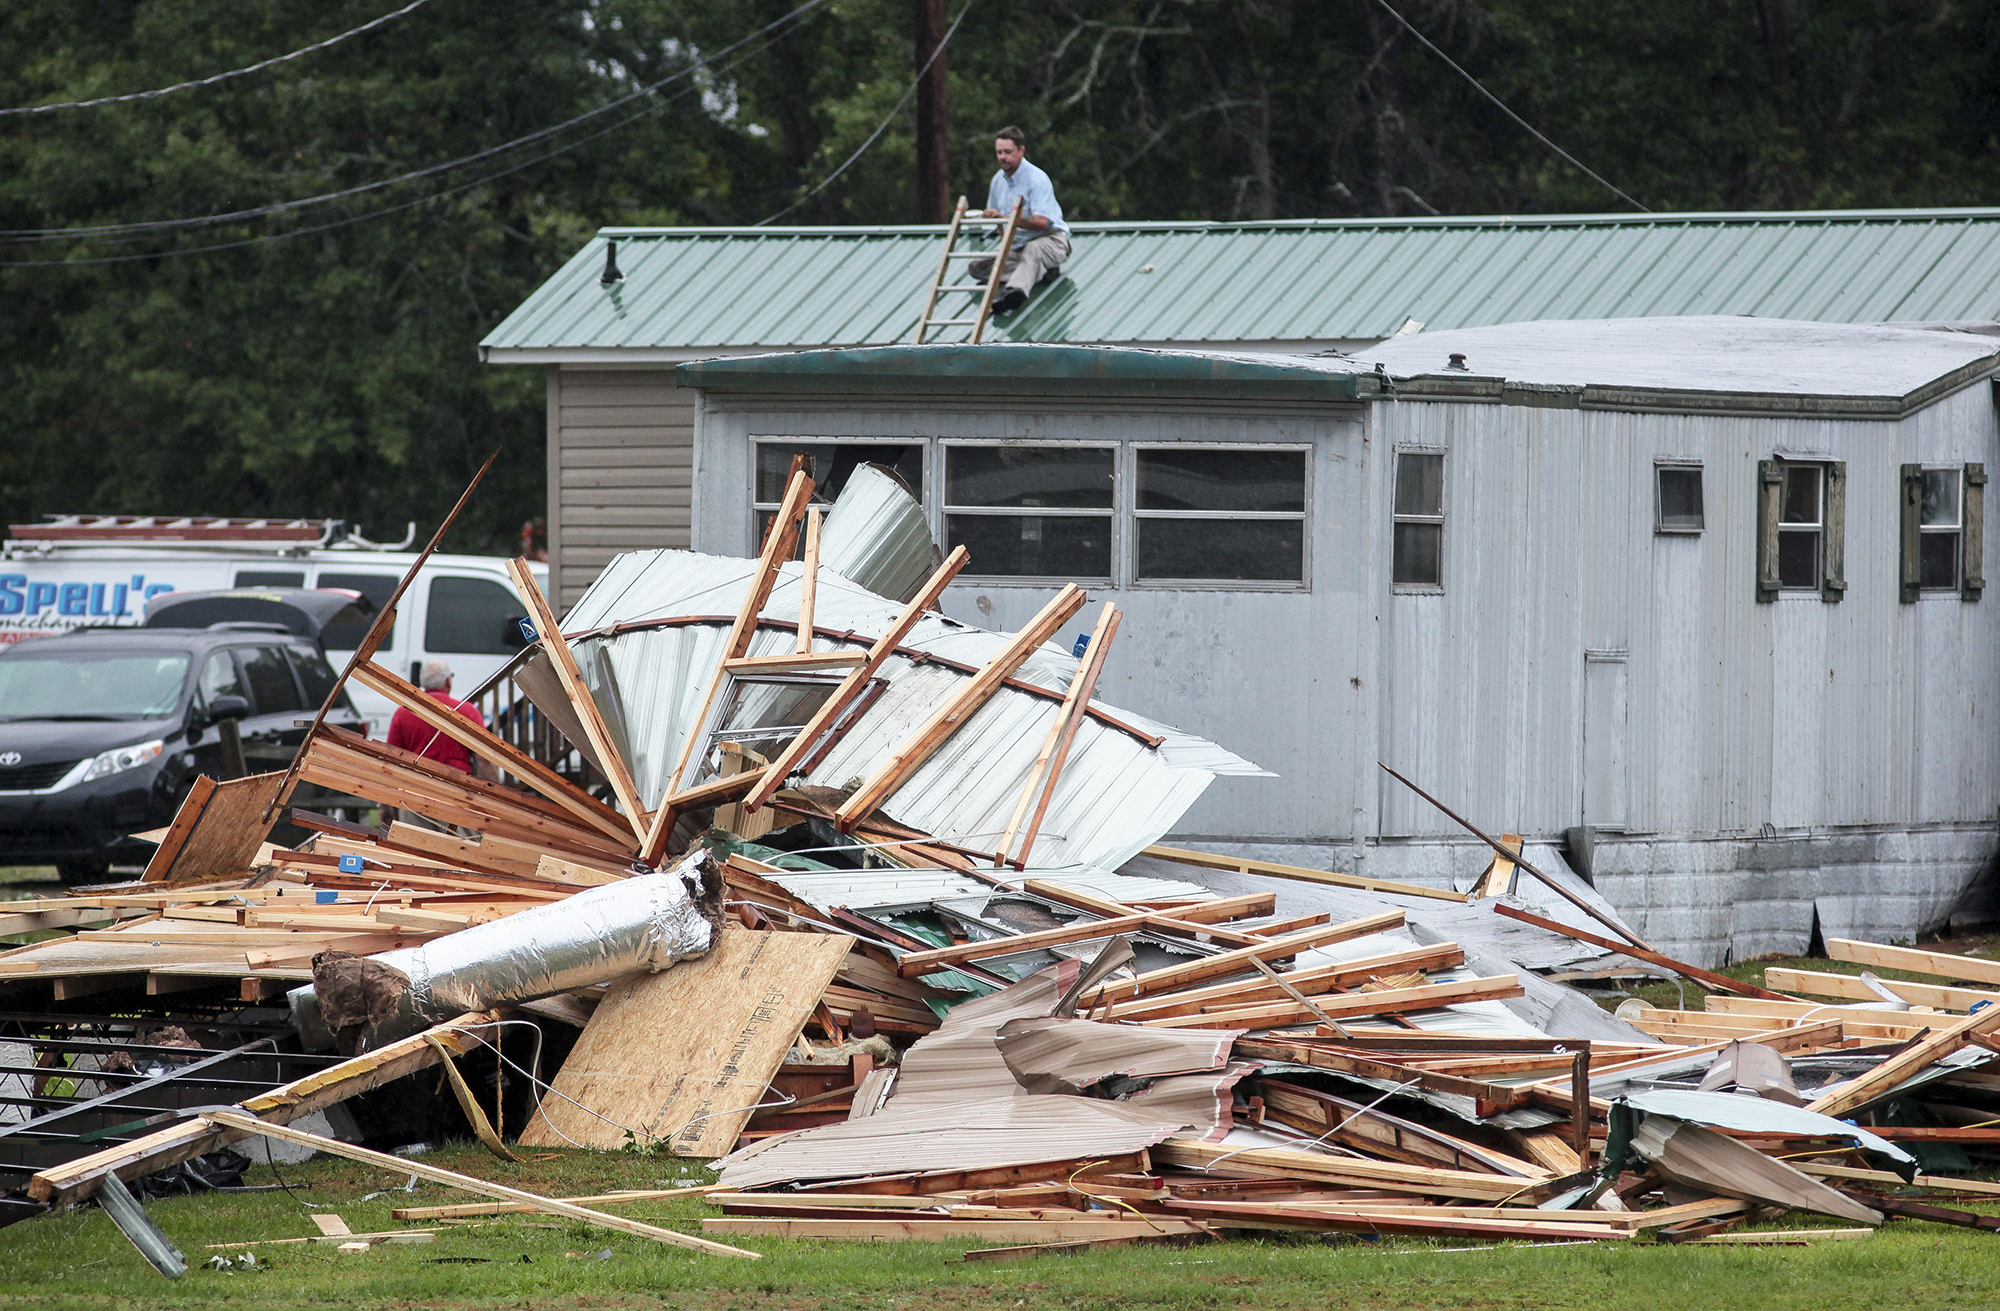 A man patches holes in his roof after a possible tornado destroyed parts of a mobile home neighborhood and a volunteer fire station in Autryville, N.C., on May 23, 2017. (Raul Rubiera—AP)